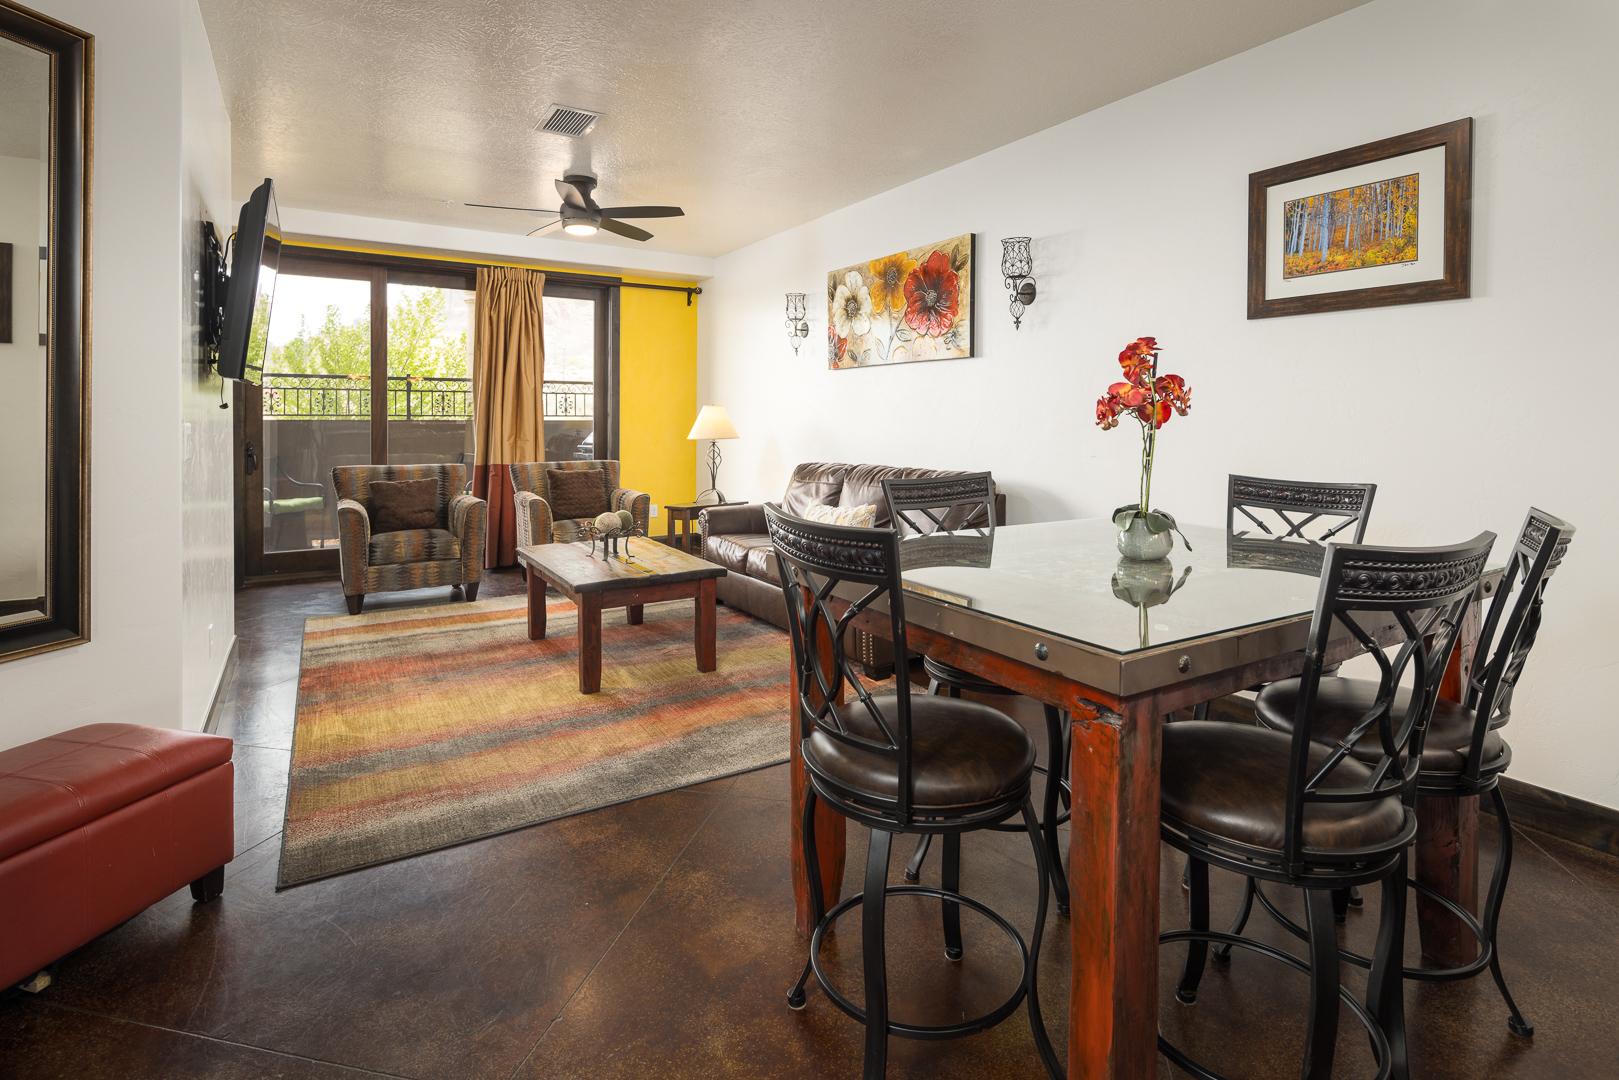 Bright, open floor plan with plenty of seating for a group of 6!